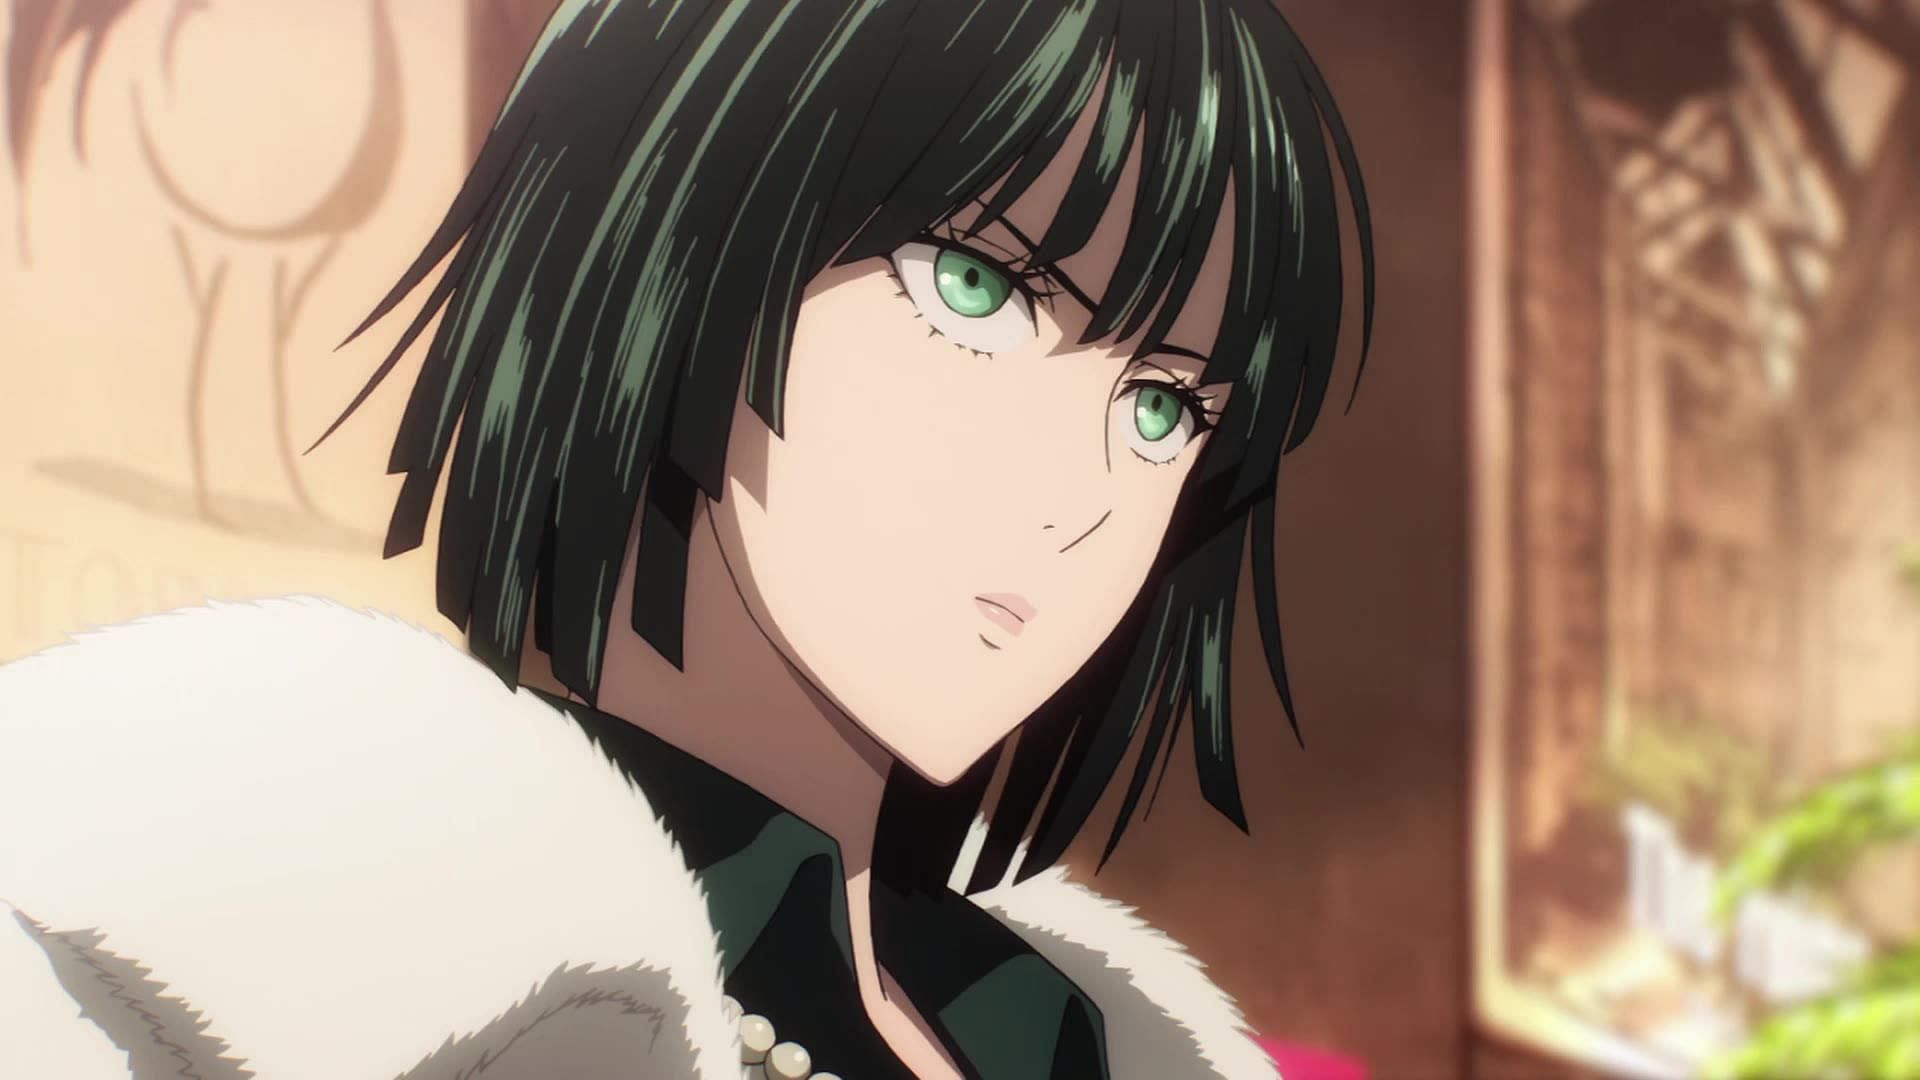 Fubuki, as seen in the One Punch Man series (Image via J.C. Staff)